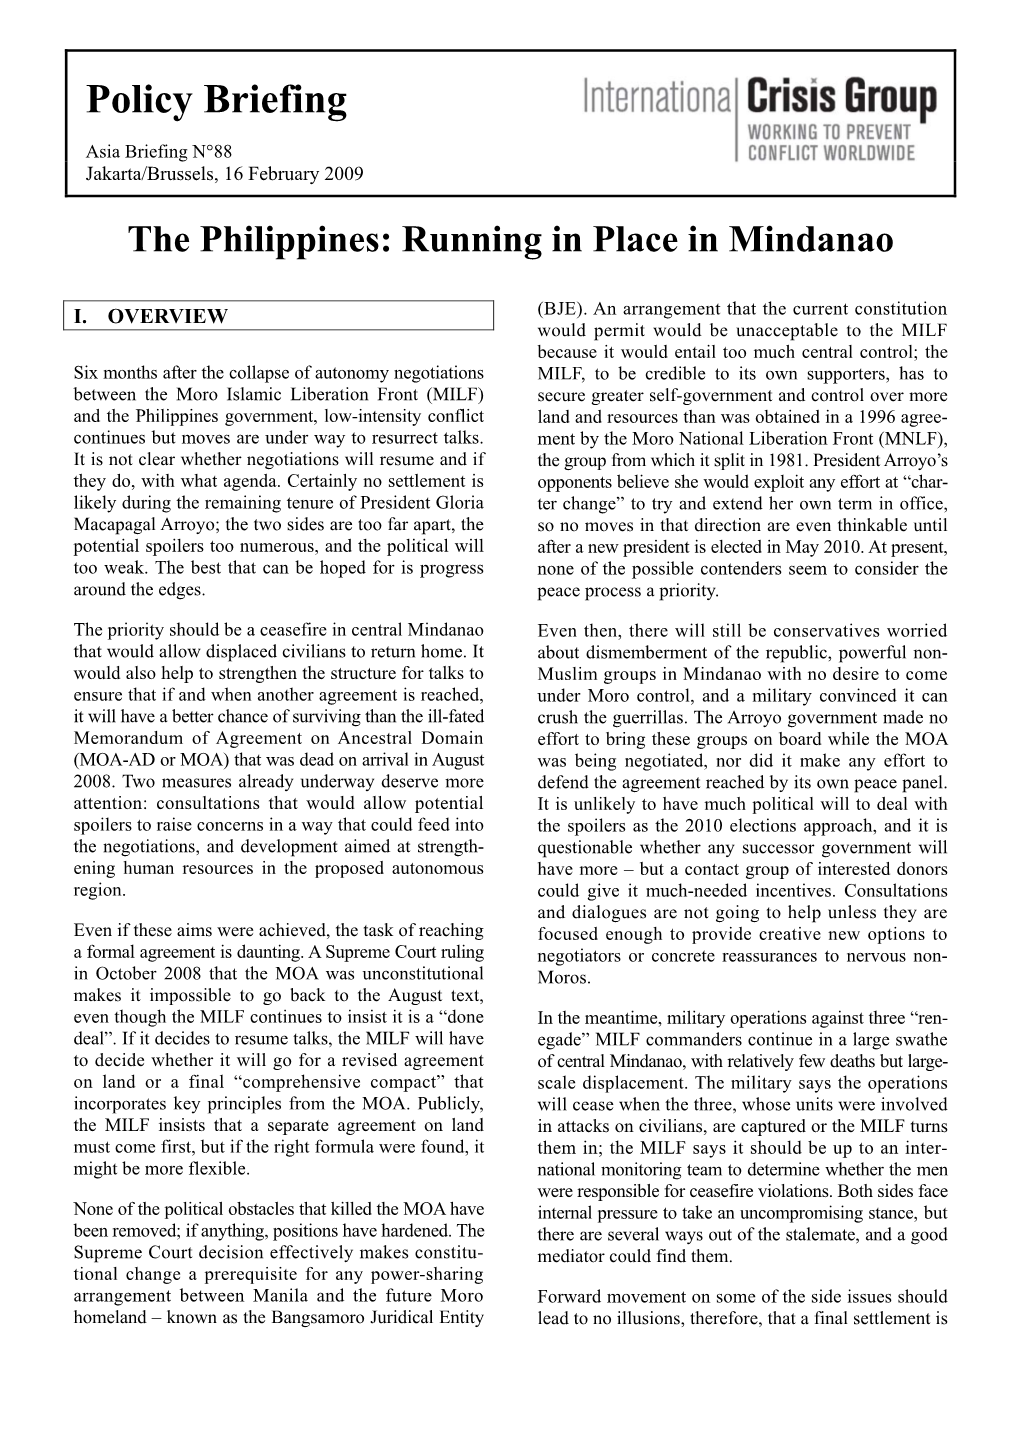 The Philippines: Running in Place in Mindanao